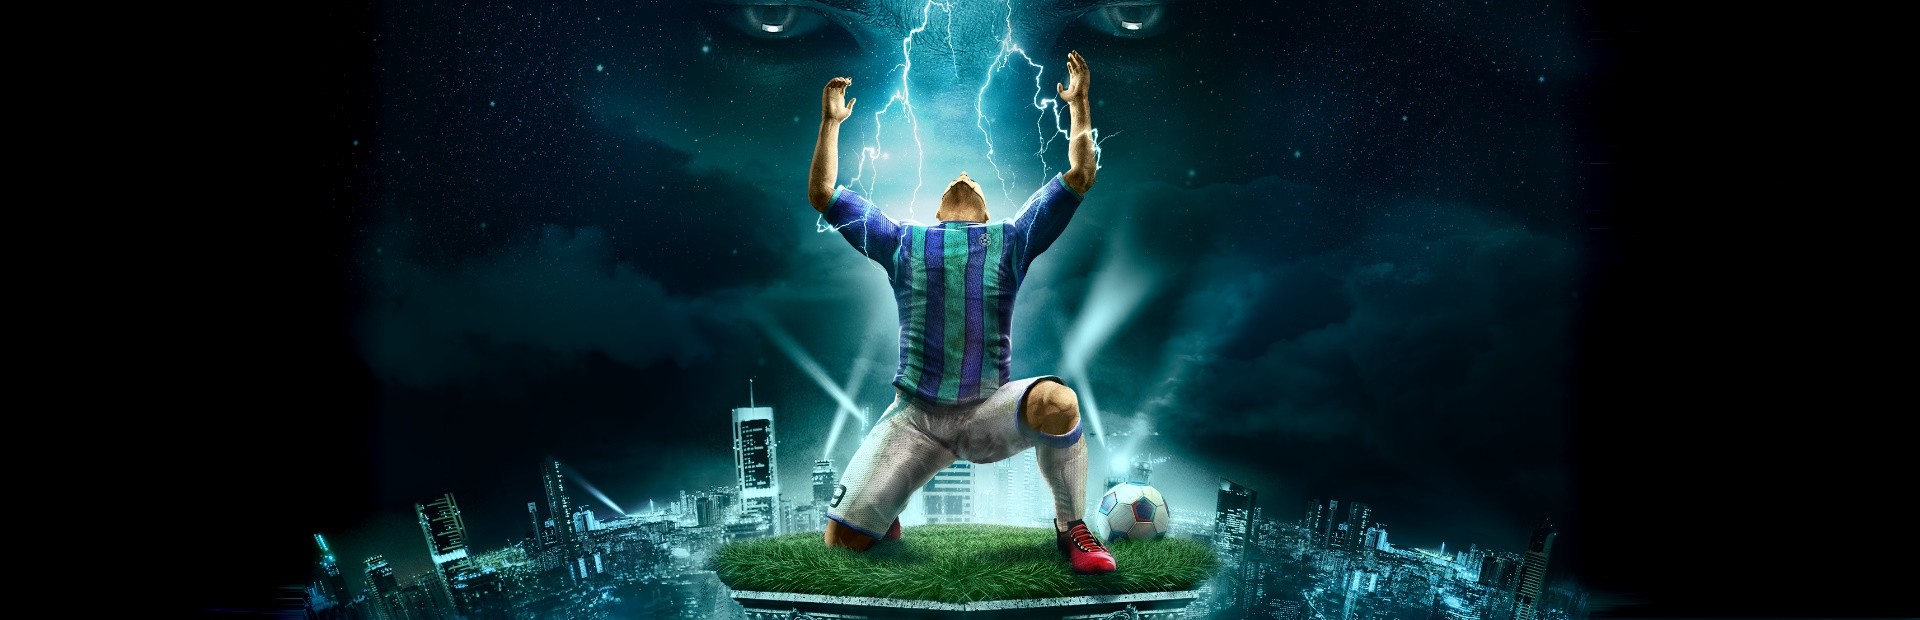 Lords of Football cover image